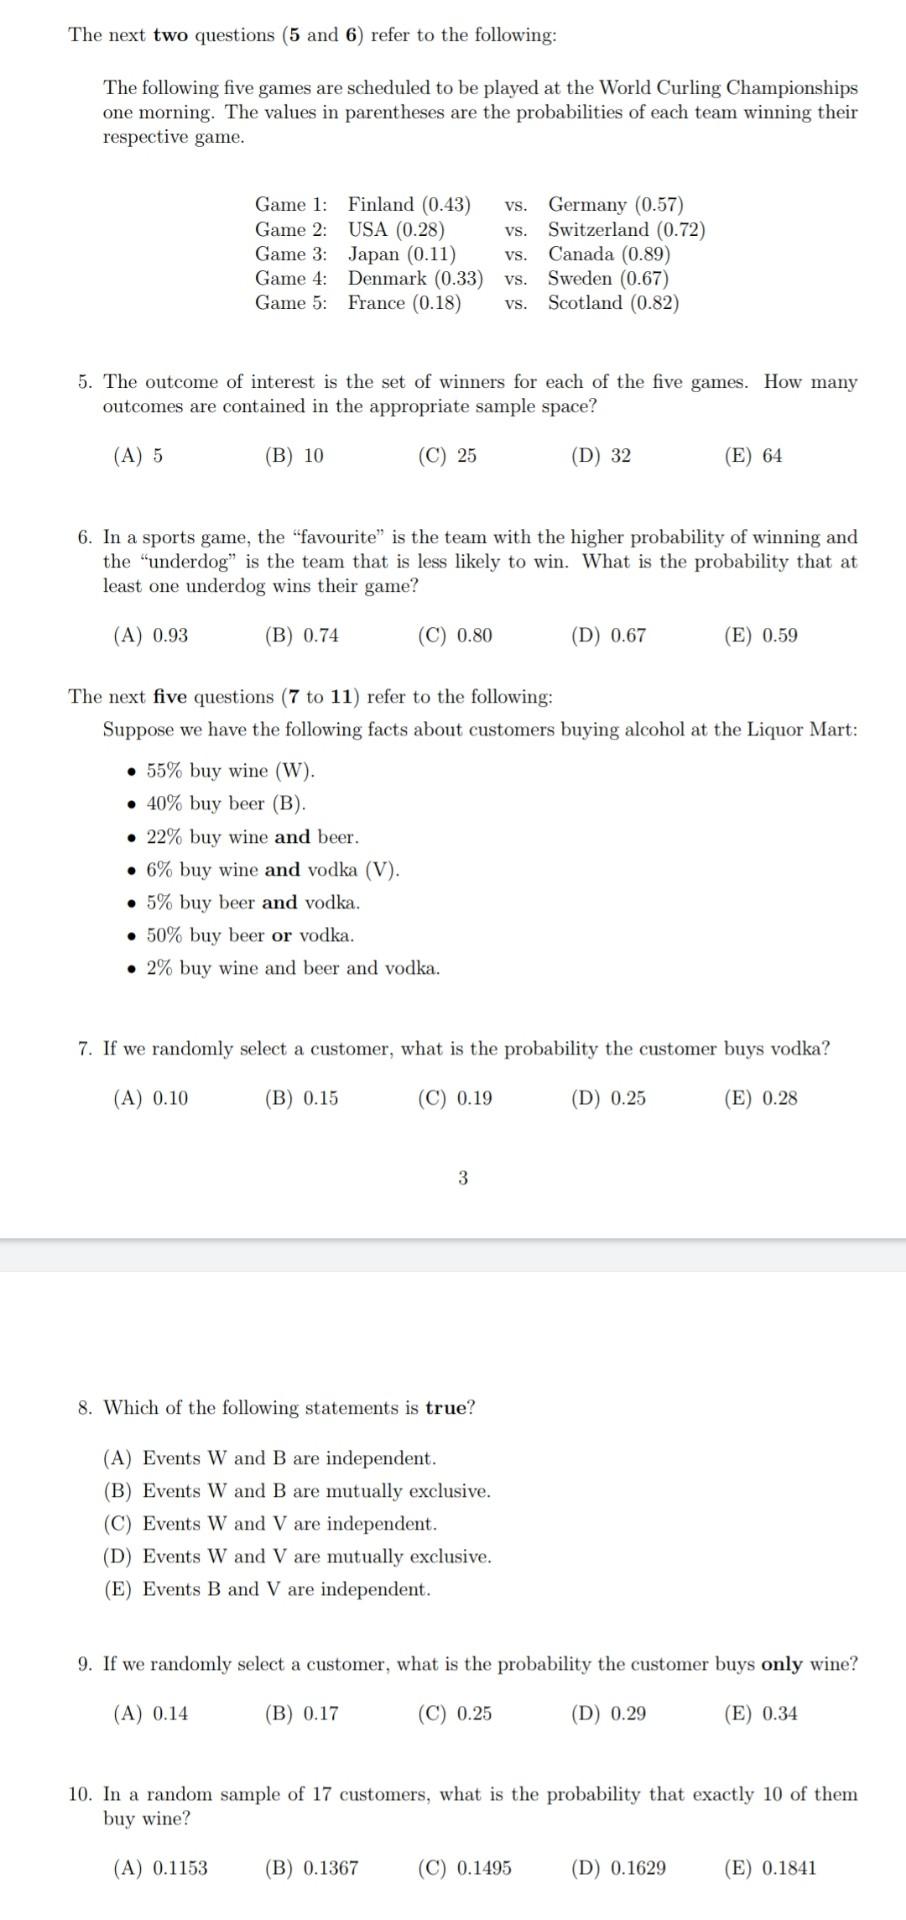 I have a question, in an IGCSE 9-1 subject for example computer science, do  I need to get the minimum raw mark for grade 8 in the table above to get the